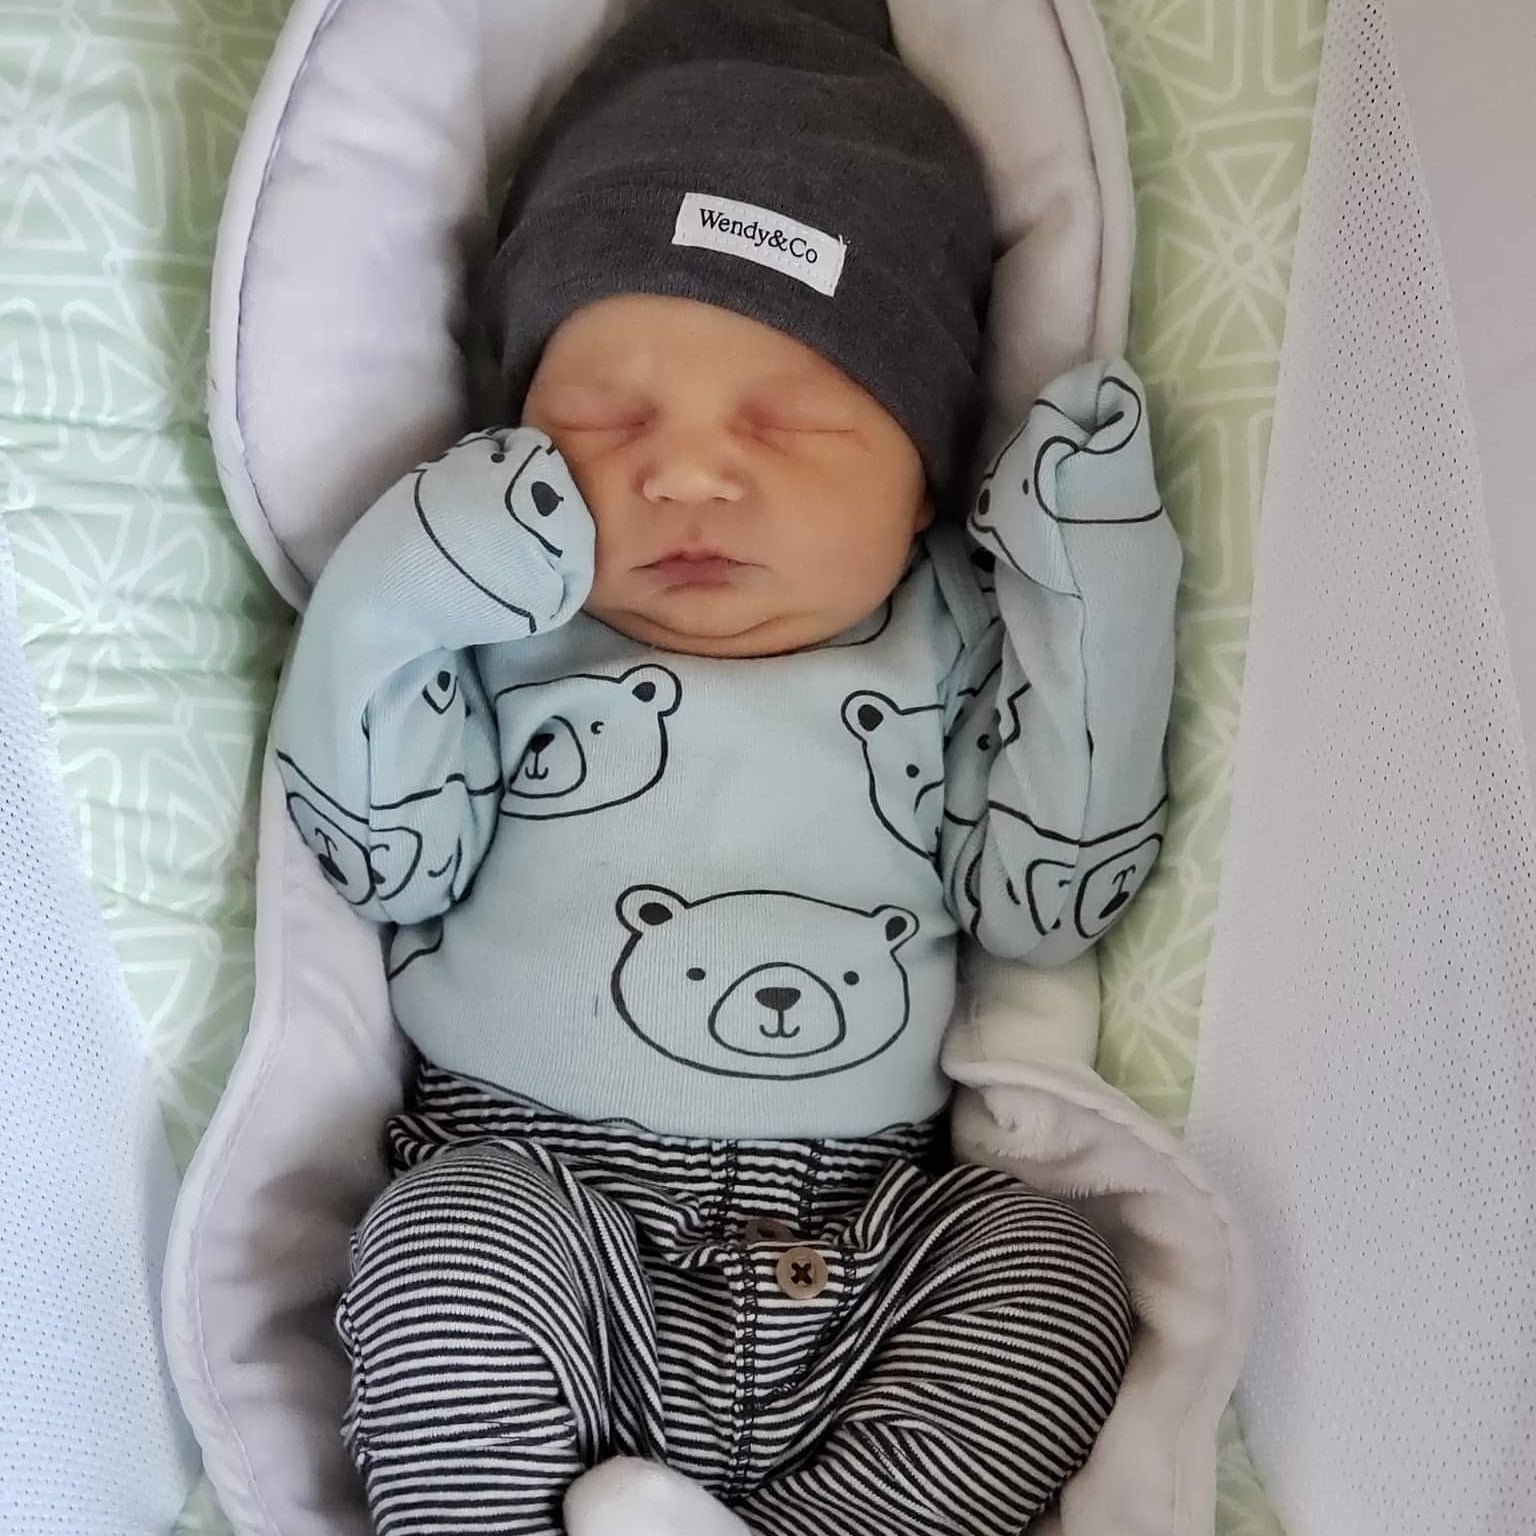 Newborn baby sleeping with bear print clothing and soft beanie with top knot.